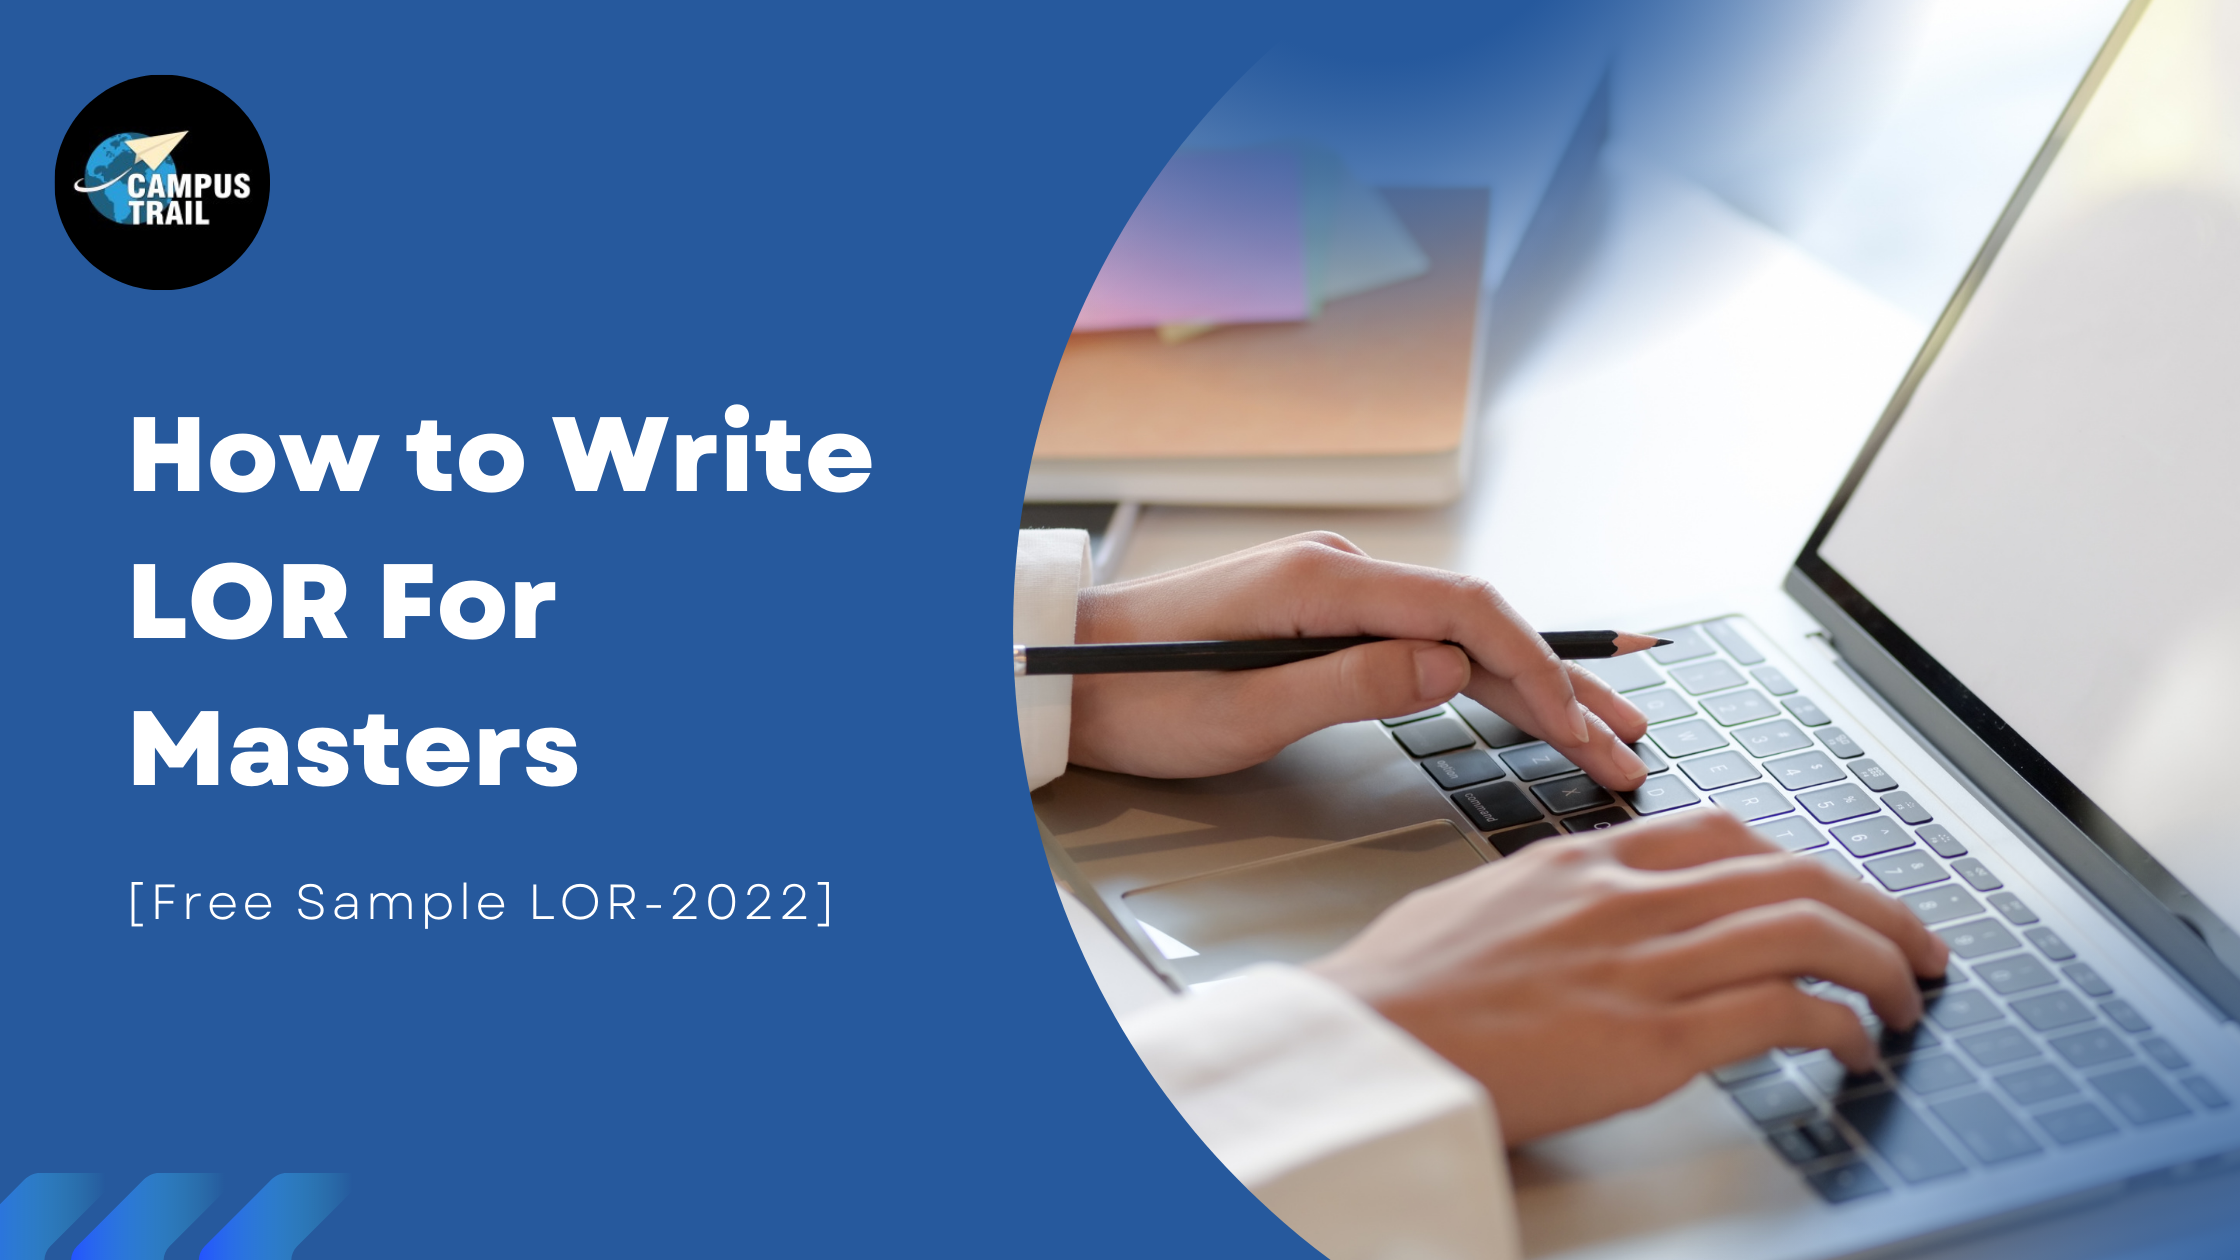 How to Write LOR For Masters [Free Sample LOR-2022]